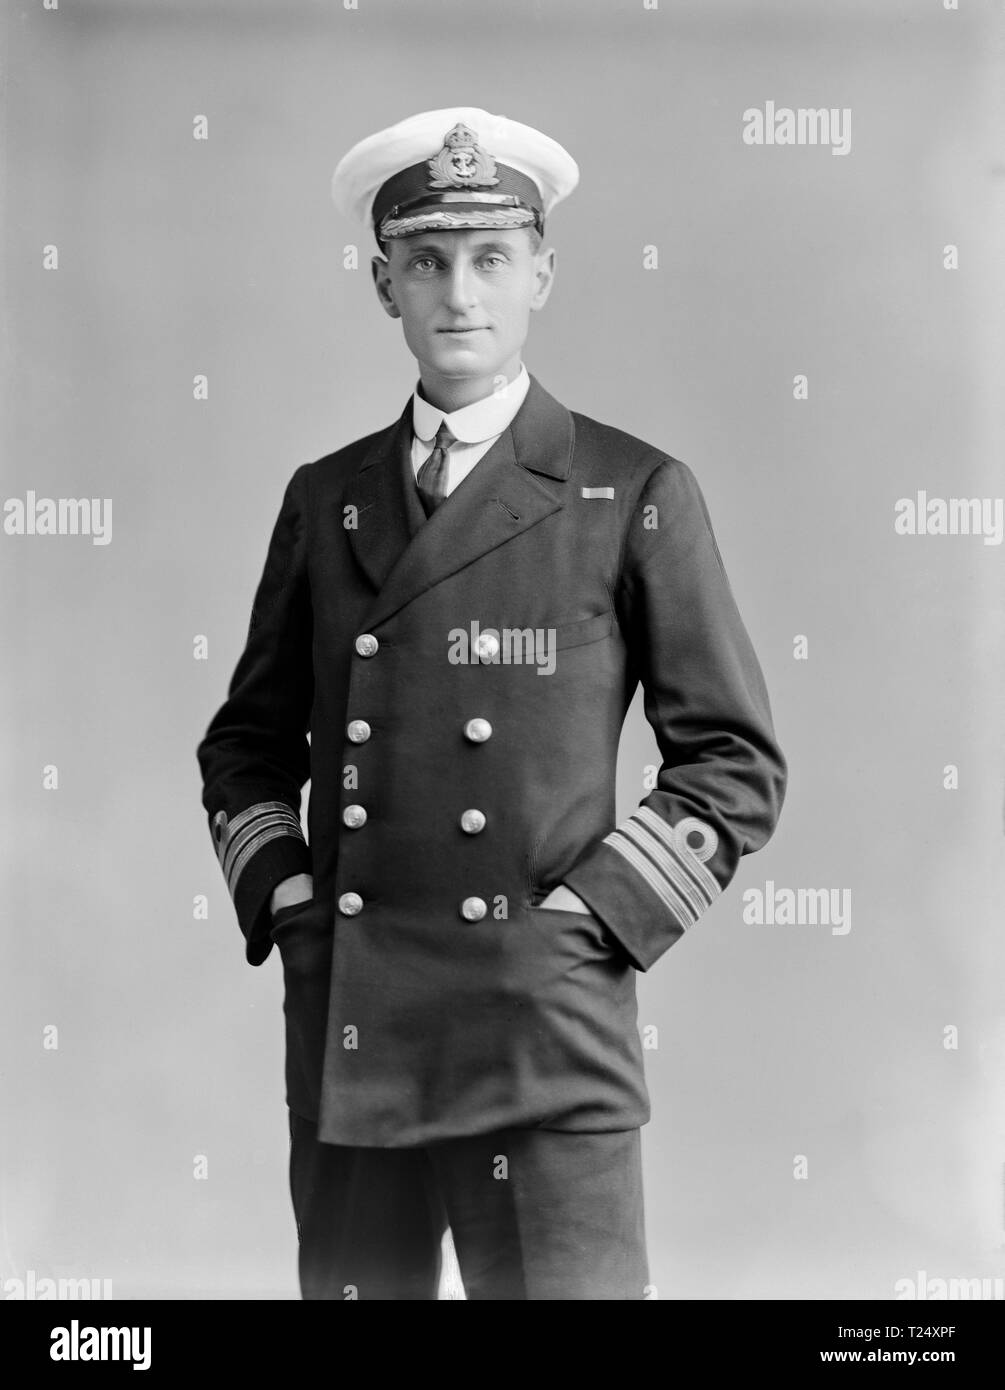 Photograph taken on 26th September 1916. Commander K. H. Humphreys of the British Royal Navy. Photograph taken in the famous London Photographic Sudios of Alexander Bassano. Stock Photo